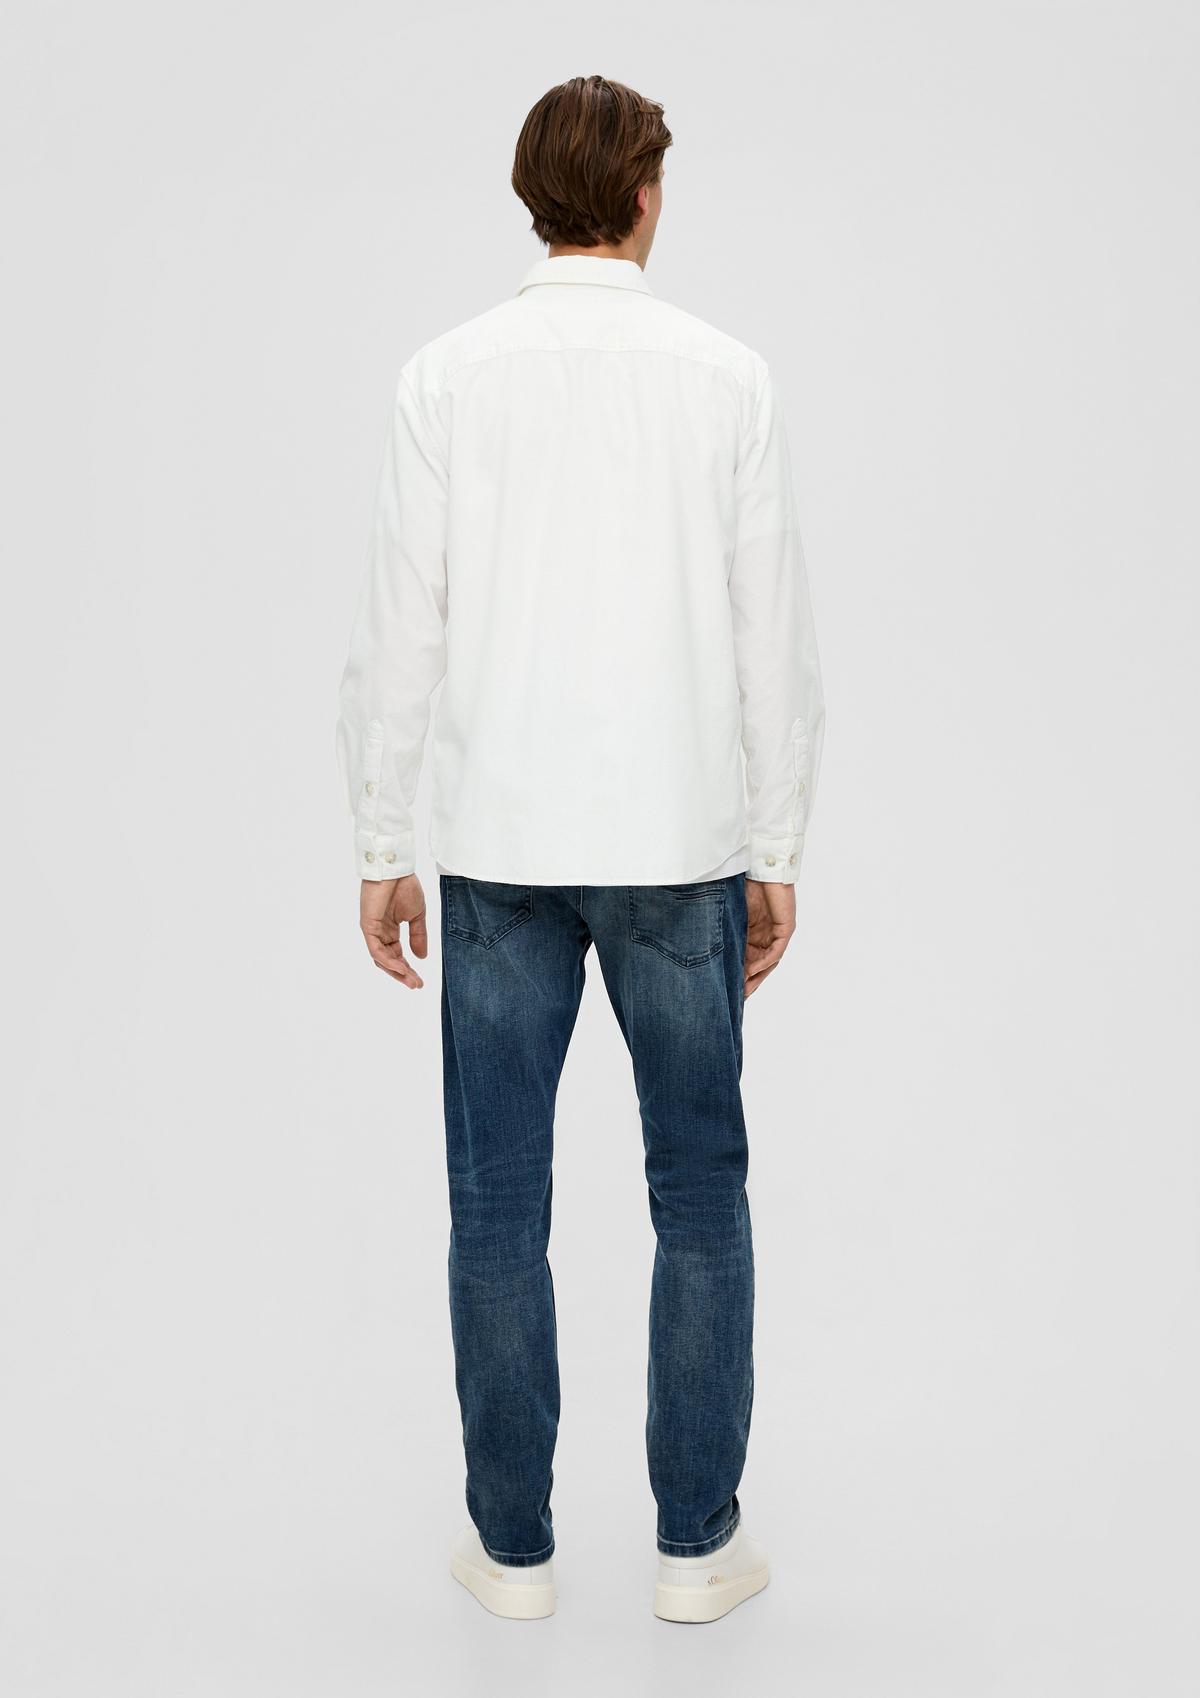 Regular fit: long shirt cotton white - sleeve of made